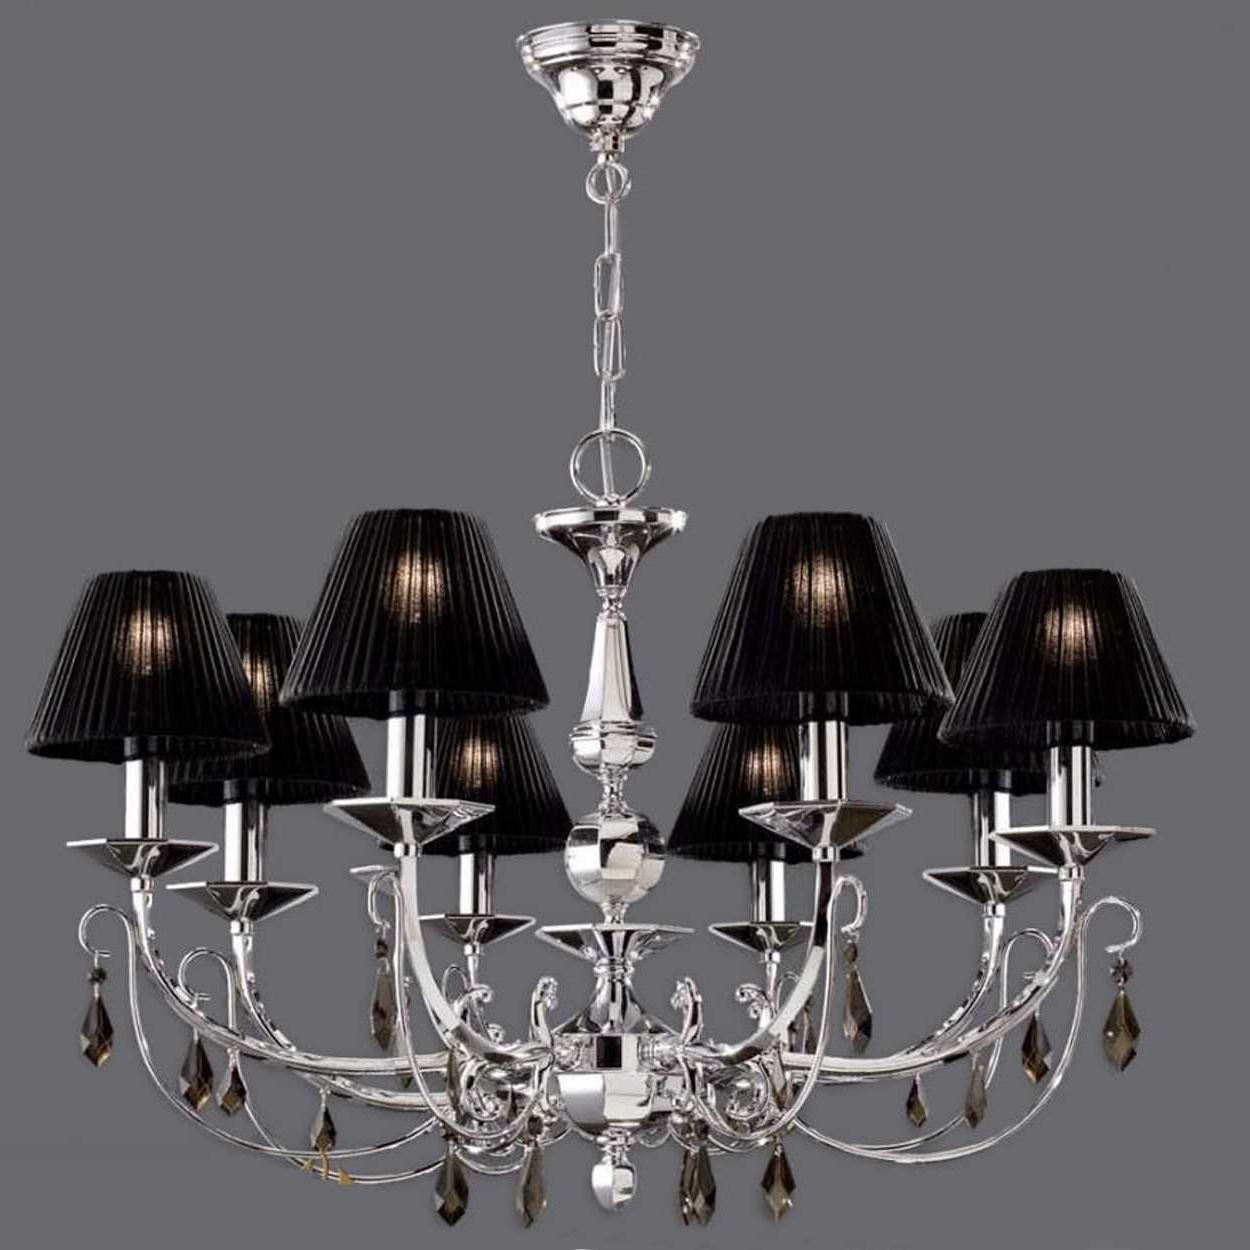 Well Known Black Lamp Shade With Crystals Fringed Also Chandeliers Design In Black Chandeliers With Shades (View 3 of 15)